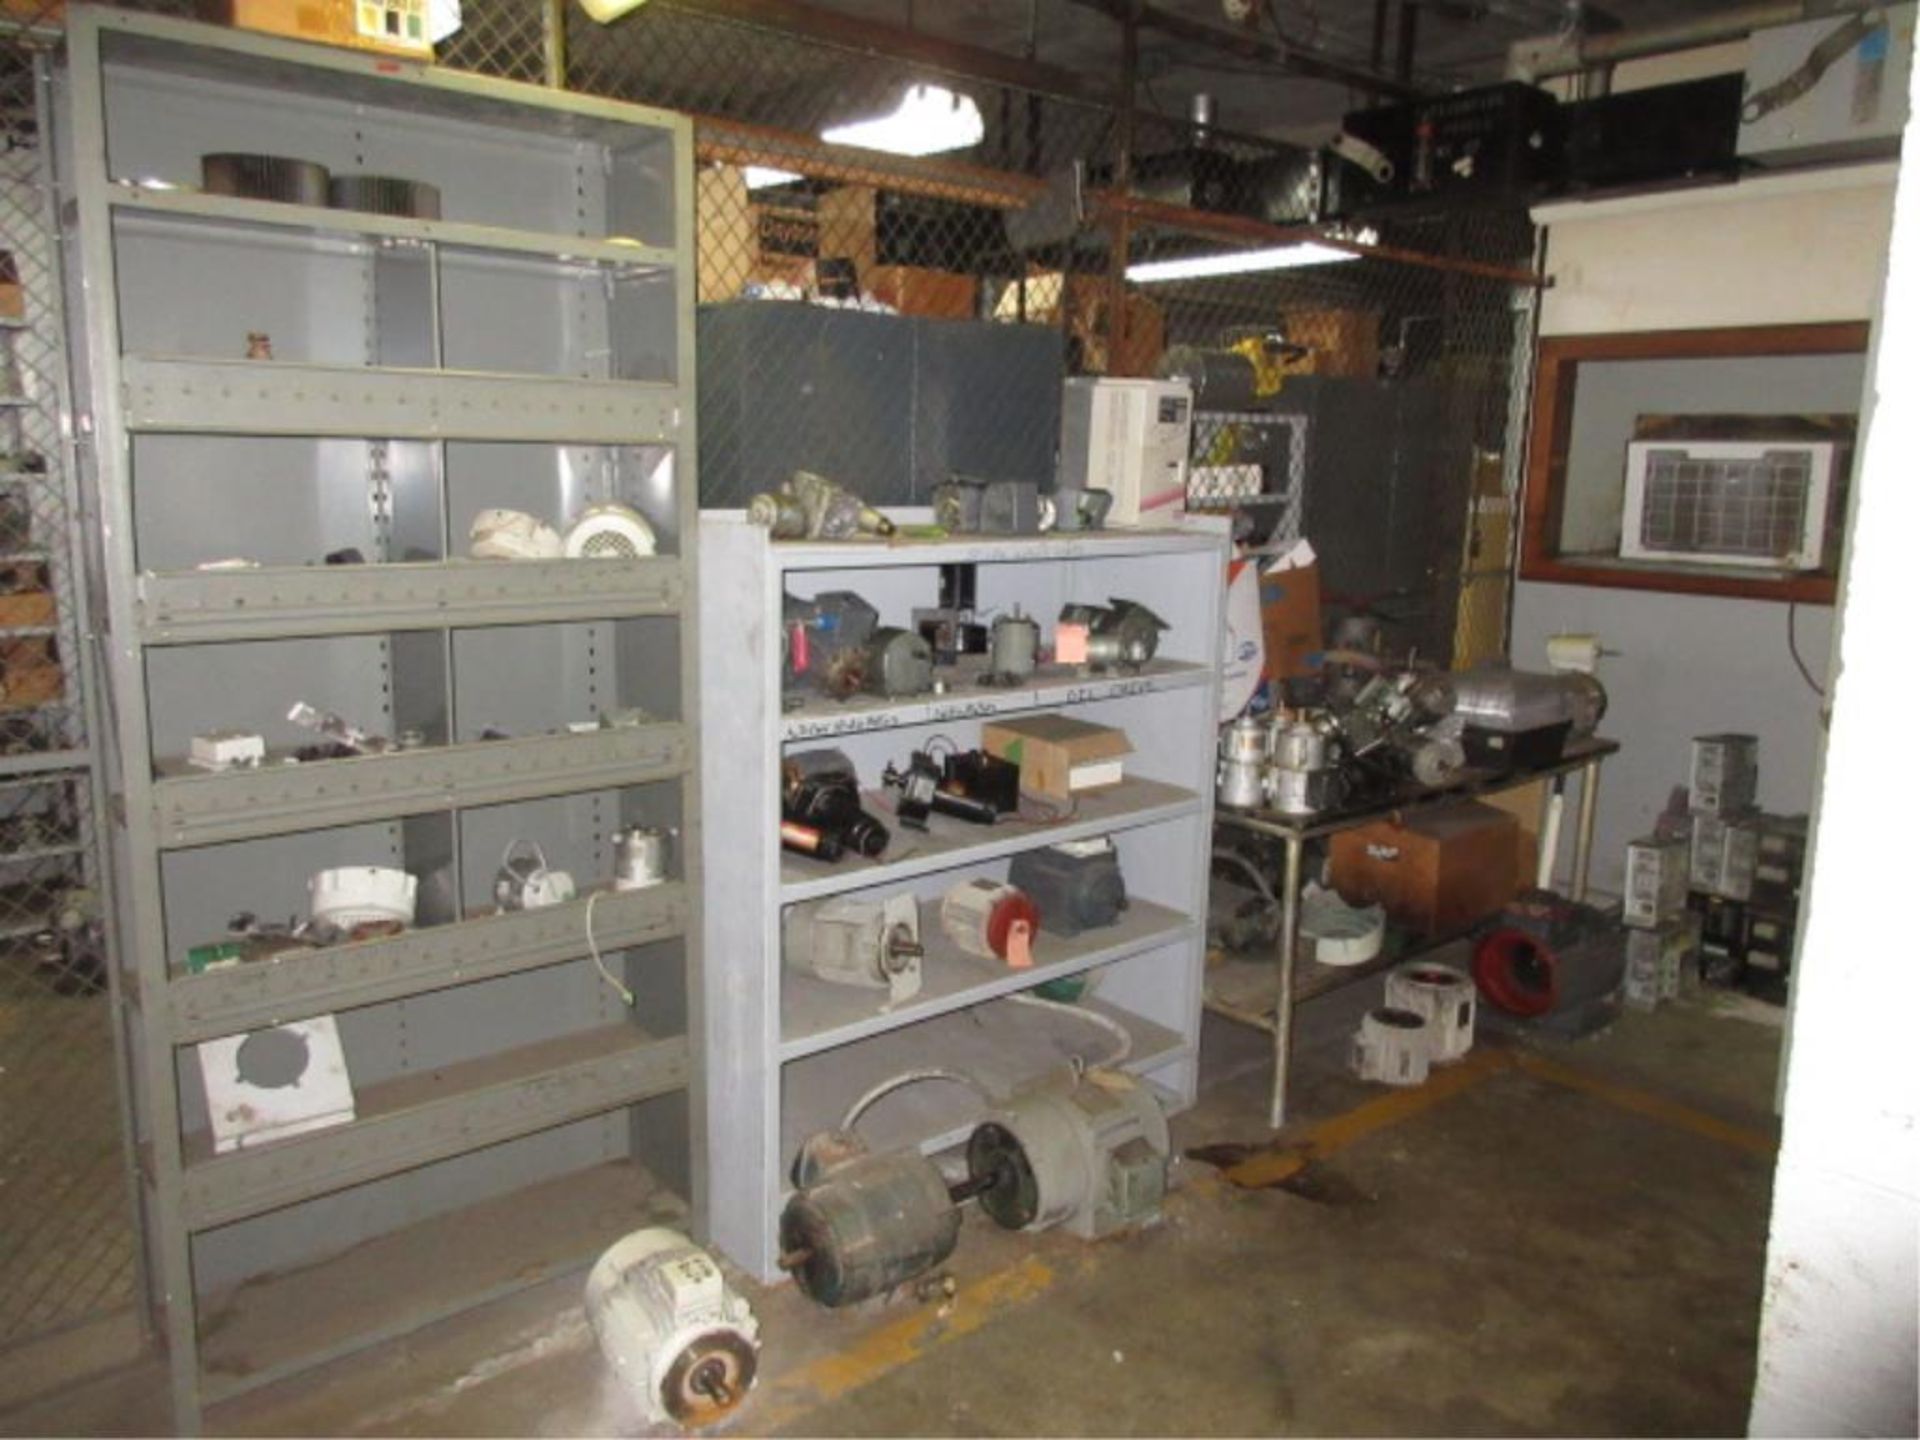 Lot Contents of Electrical Shop, includes cabinets, contents, conduit, etc. in three rooms. - Image 3 of 17